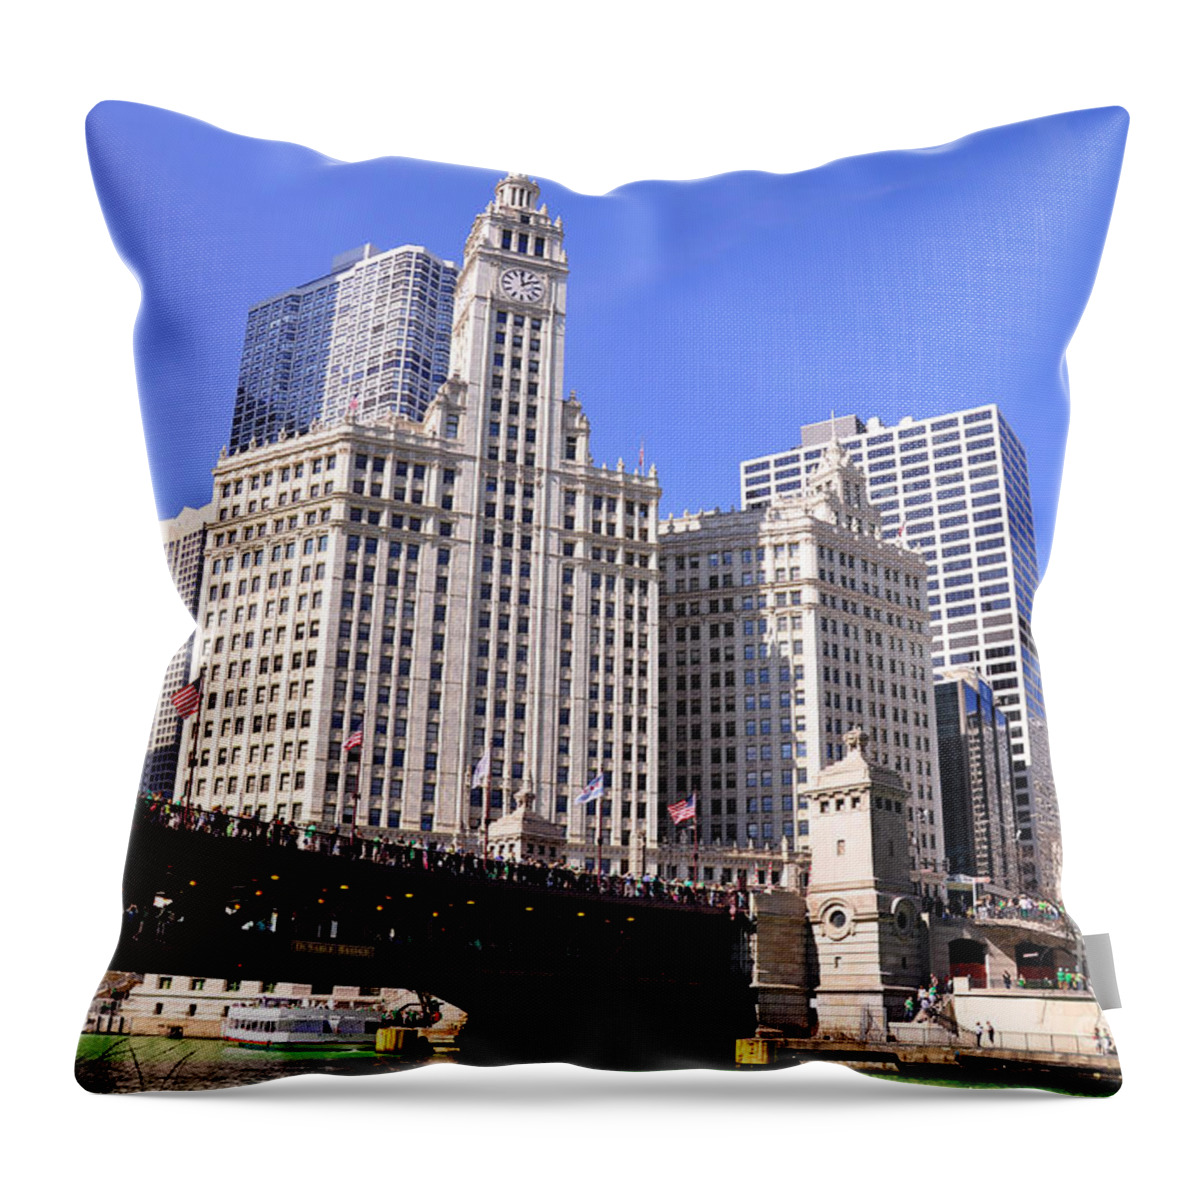 Wrigley Tower Chicago Throw Pillow featuring the photograph Chicago Wrigley Building by Dejan Jovanovic